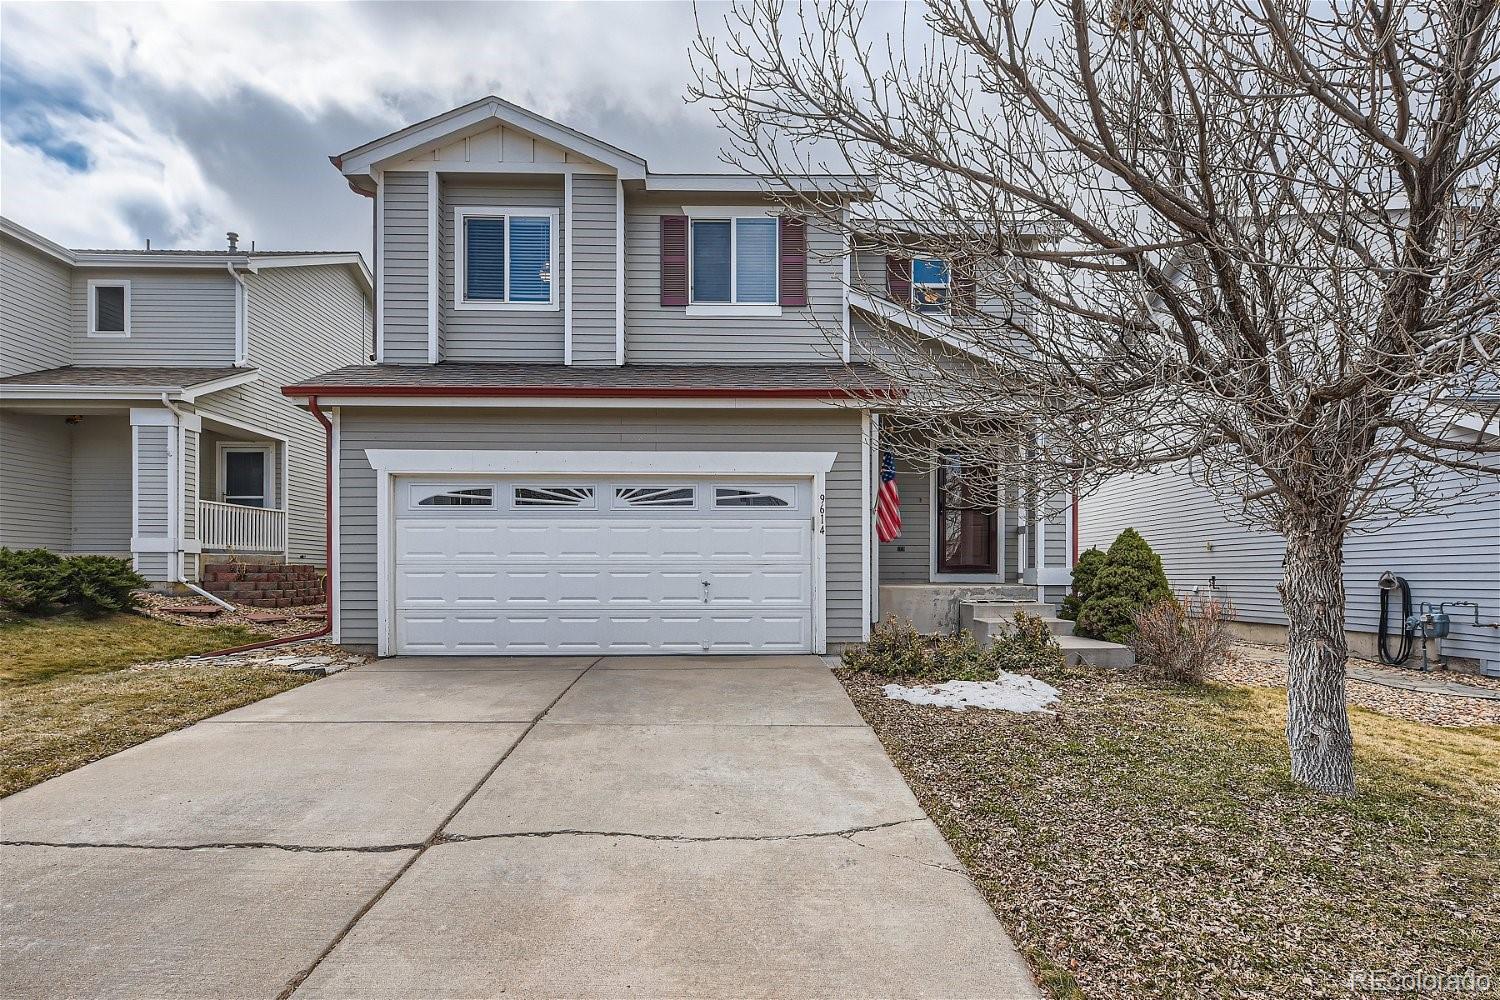 9614  elk mountain circle, Littleton sold home. Closed on 2024-05-14 for $580,000.